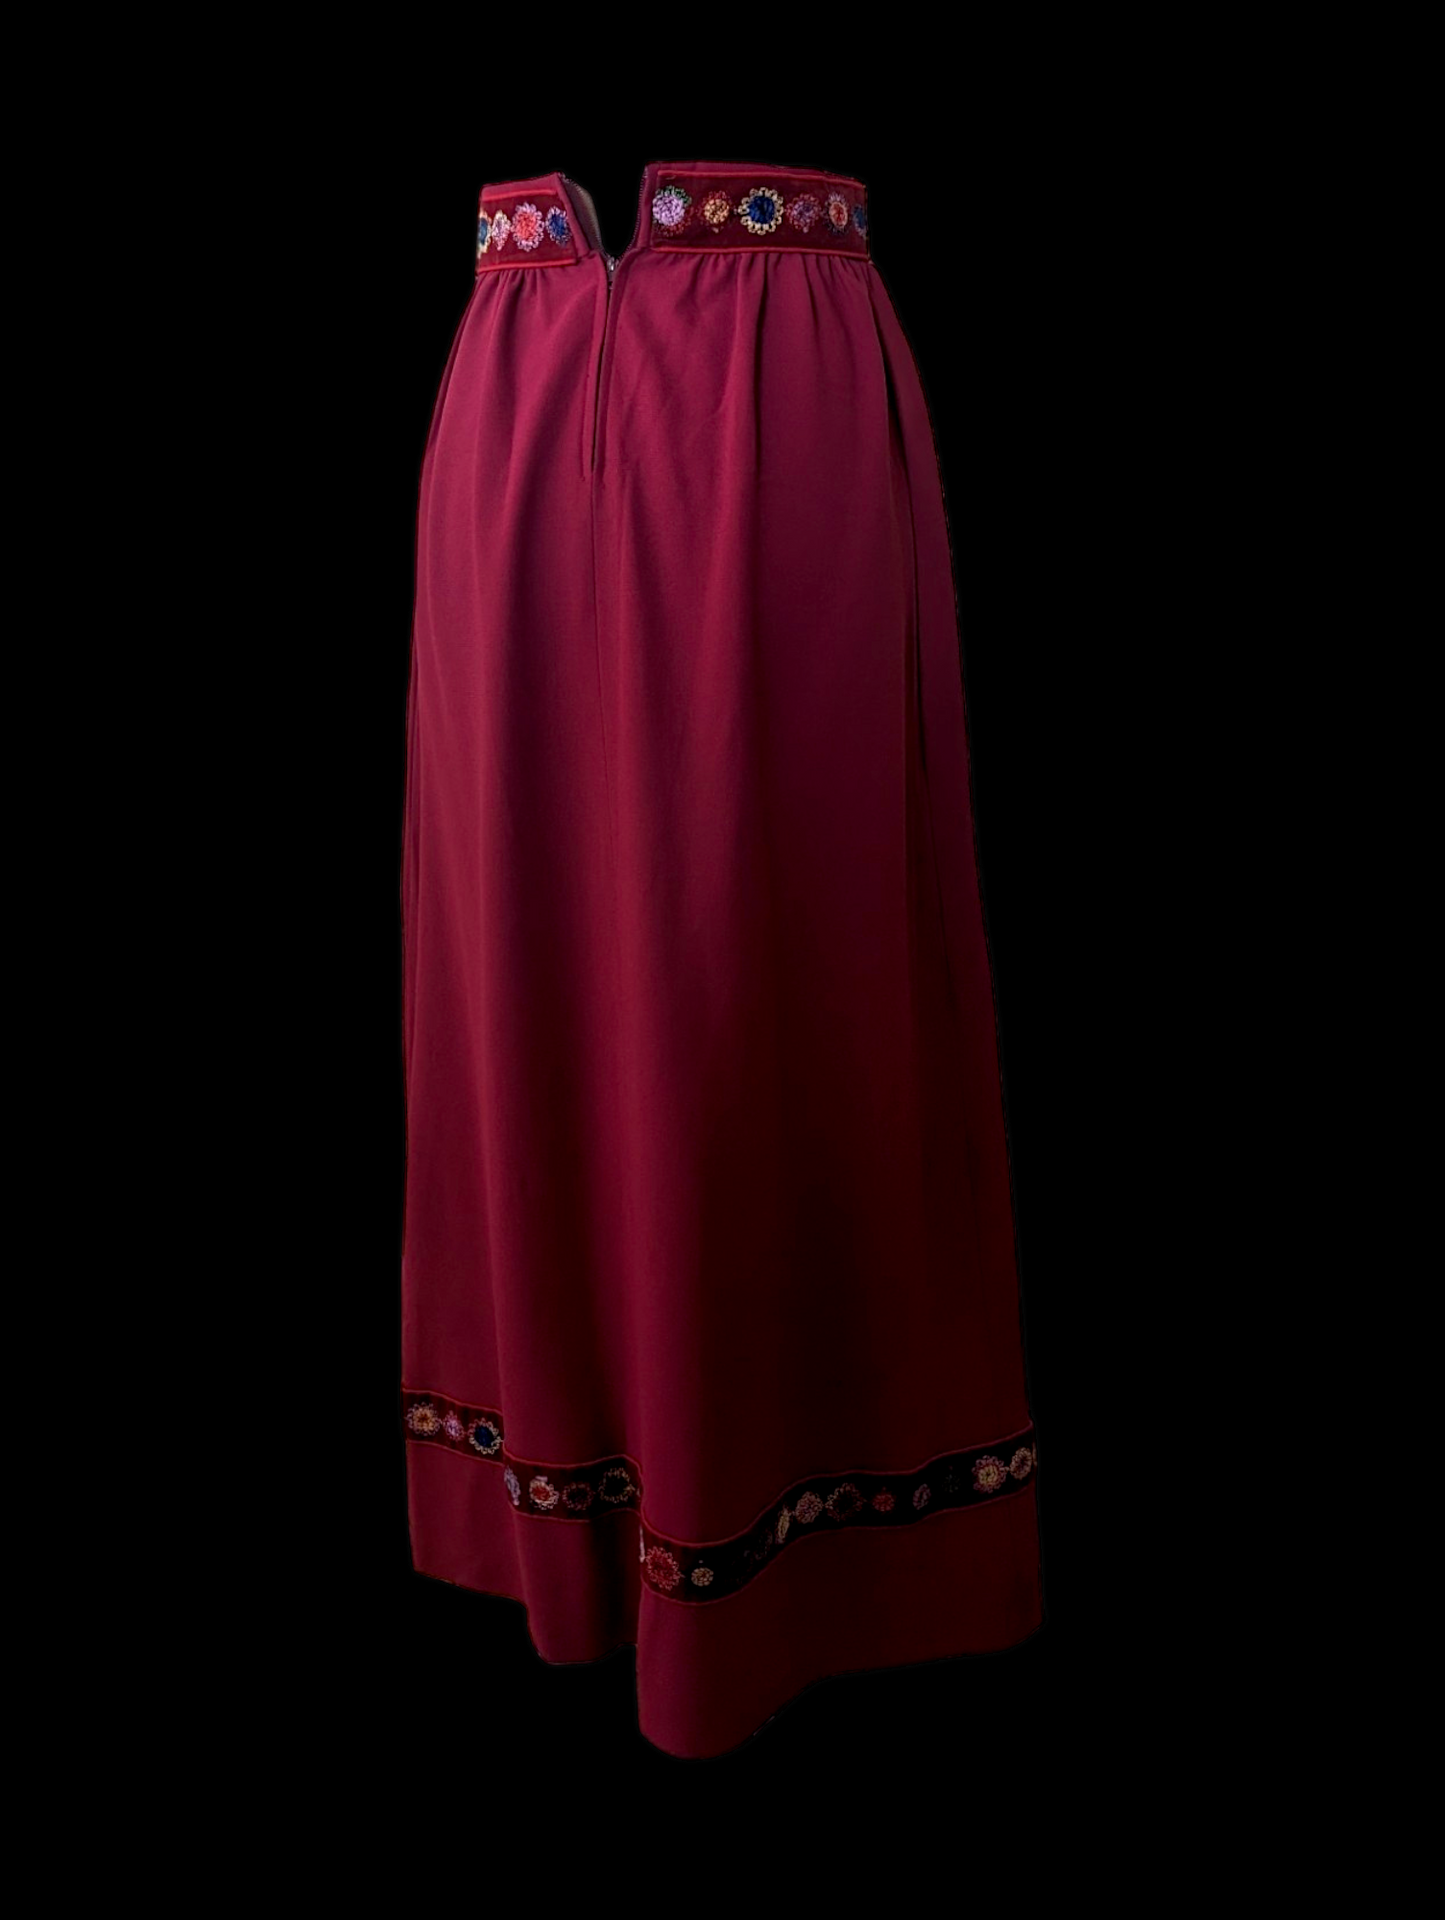 1960s High Waisted Dark Red Skirt with Floral Embroidery Trim